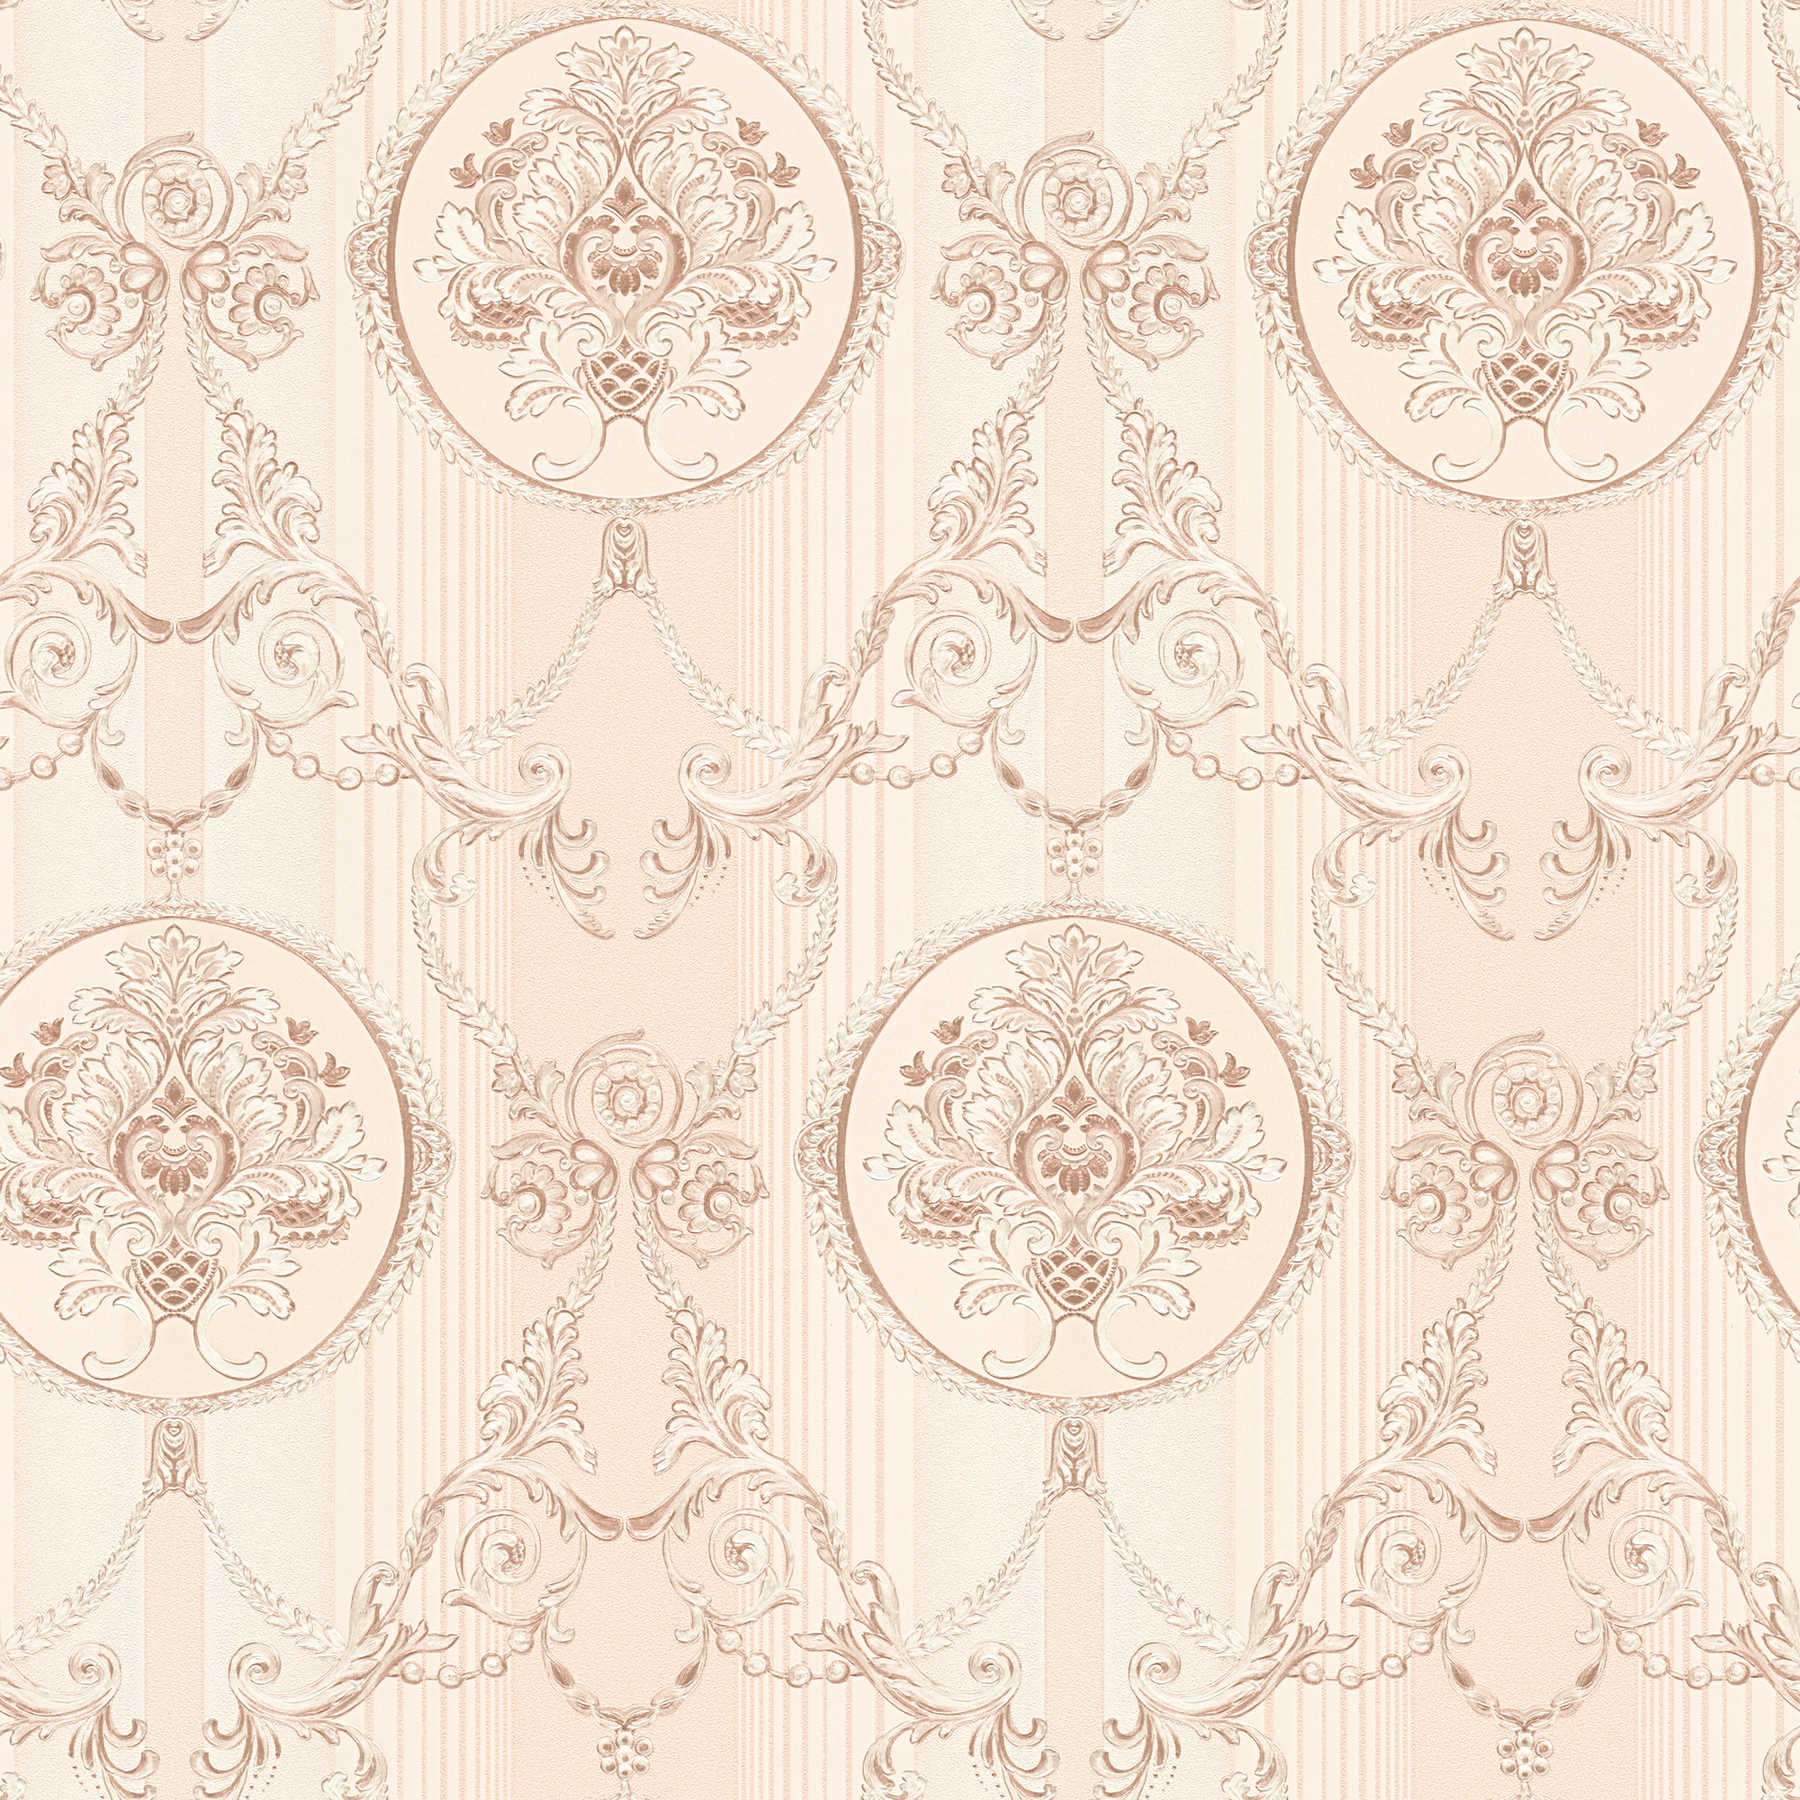 Neo baroque wallpaper with ornamental pattern & stripes - cream, pink
